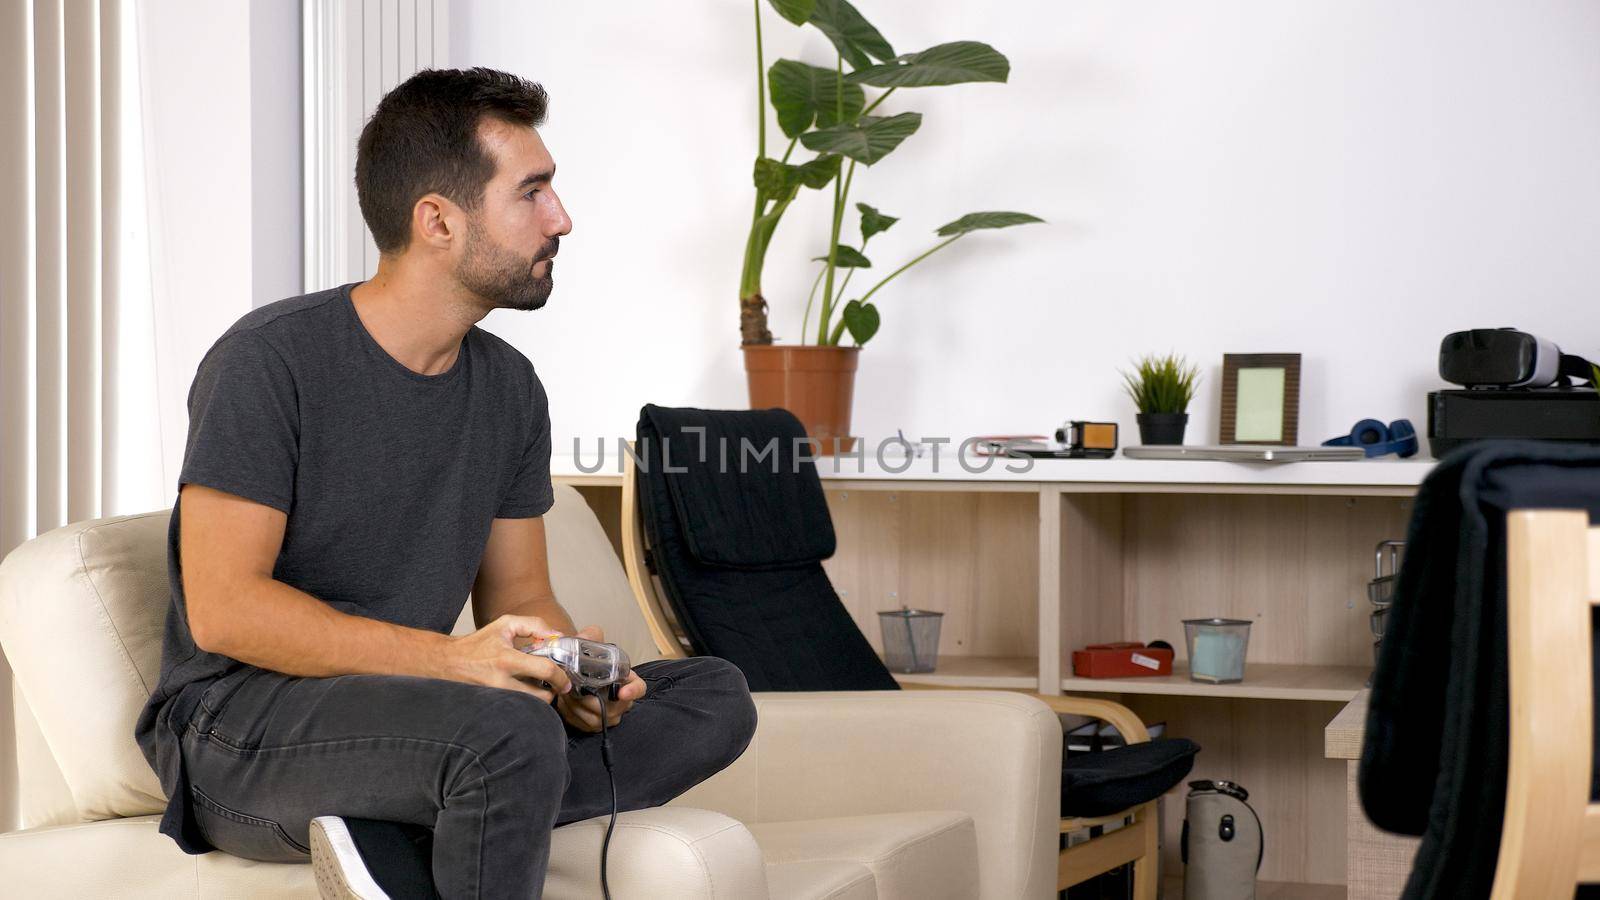 Attractive young man sitting on his couch and playing video games. Relaxing being home.